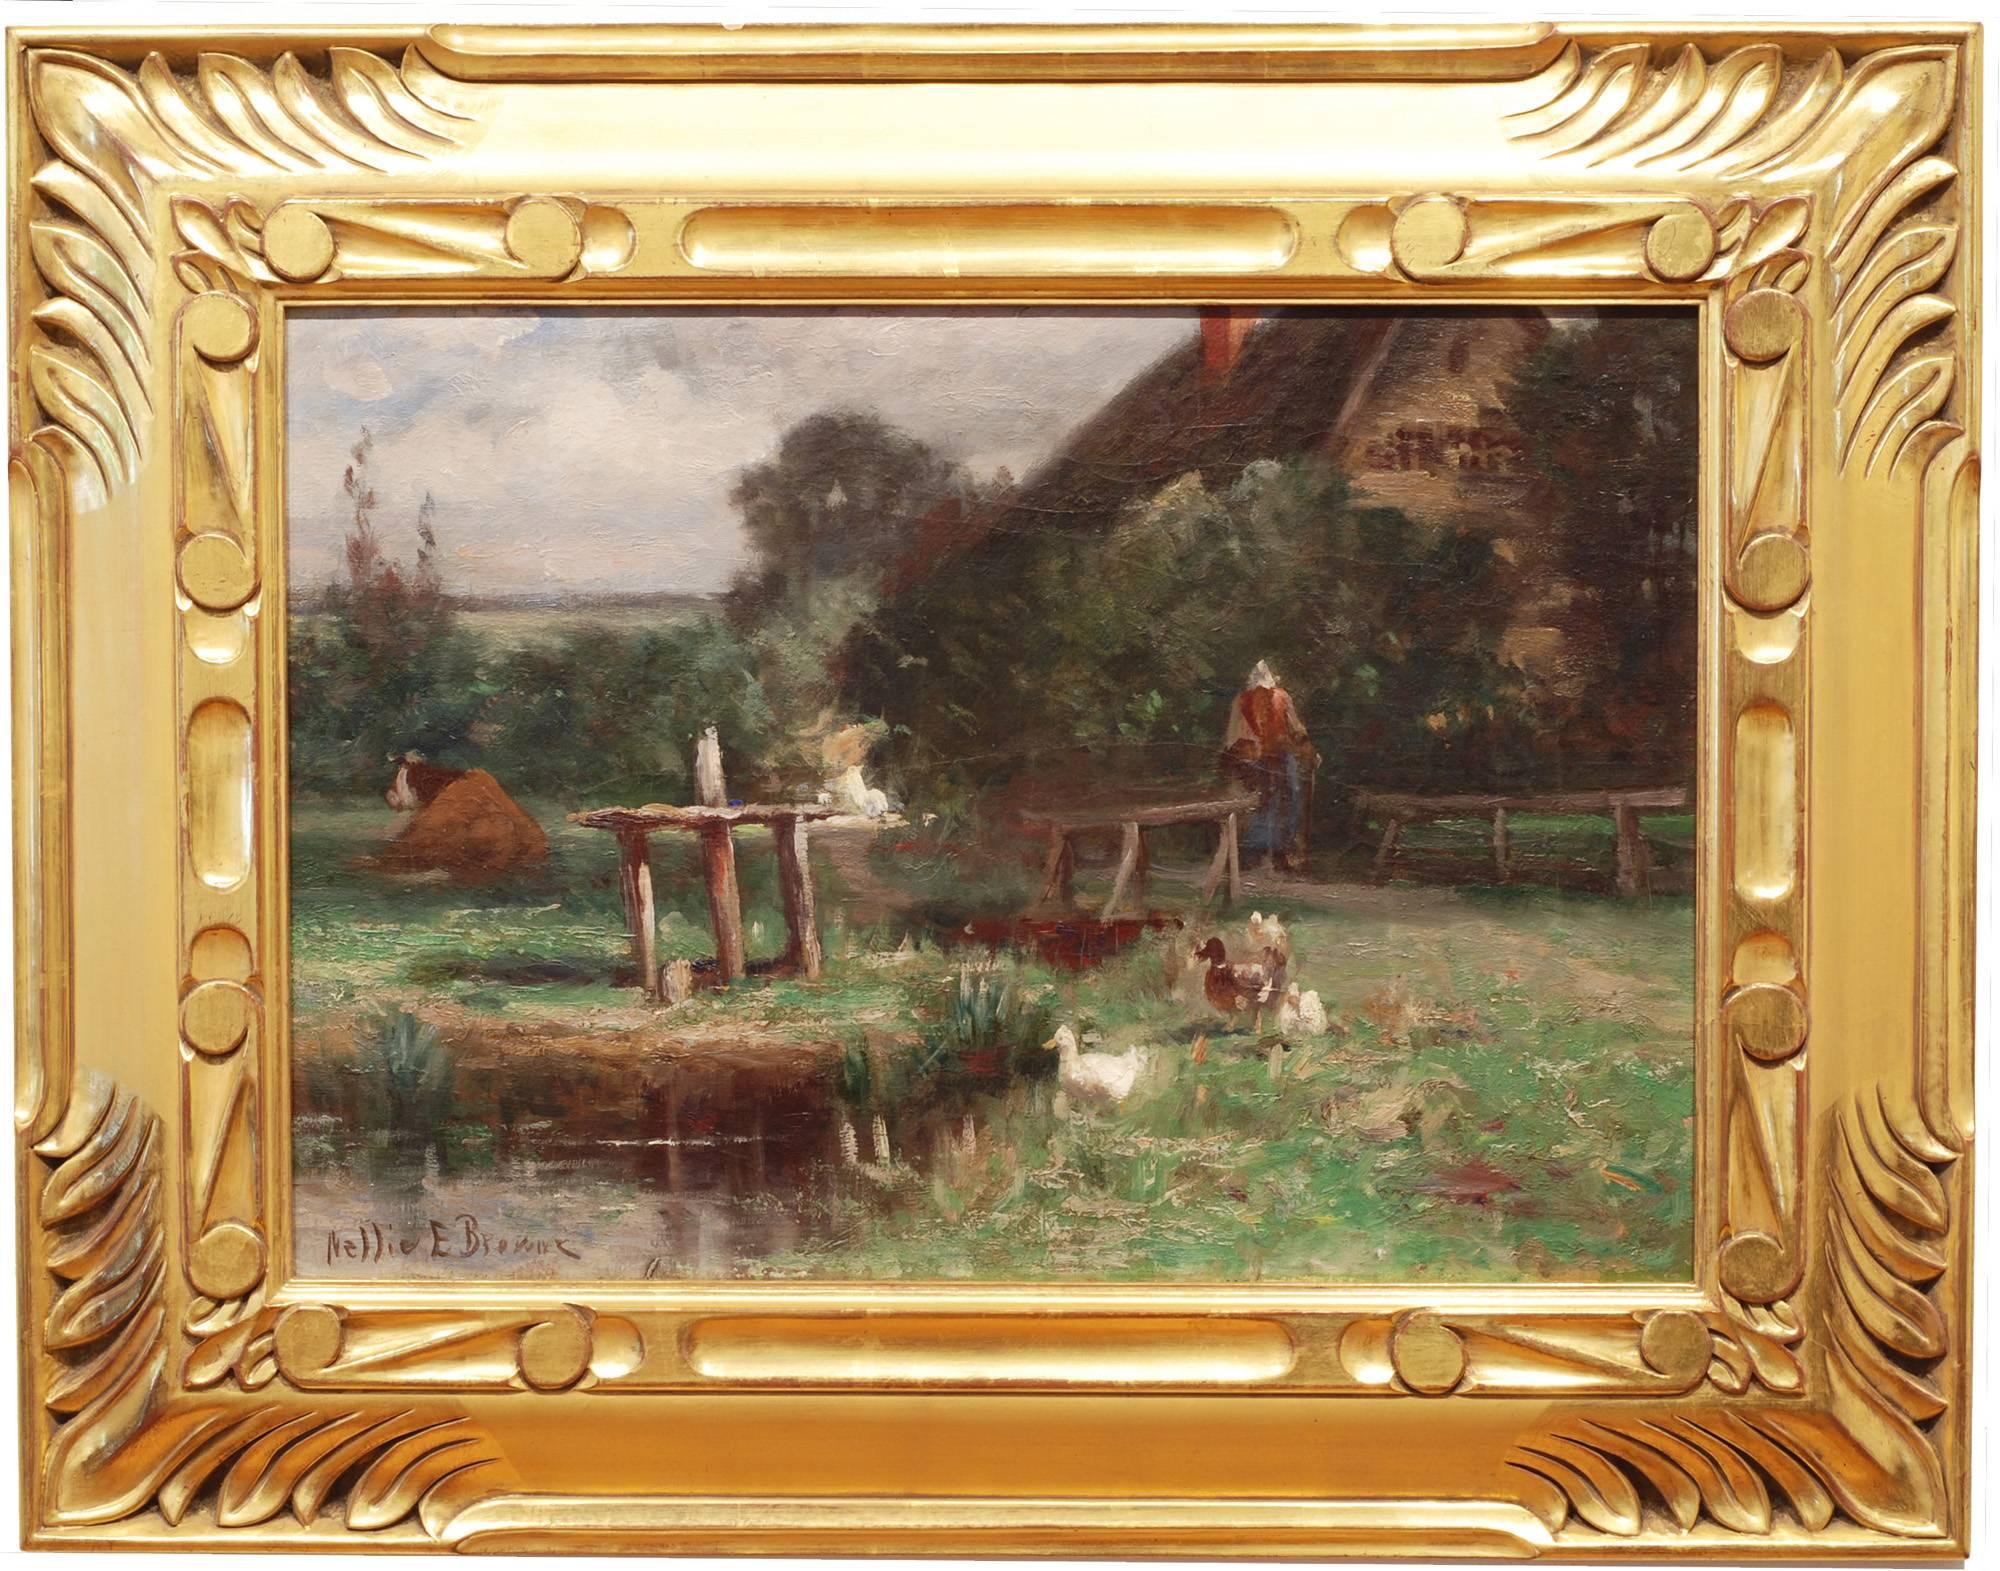 In the Farmyard - Painting by Nellie E. Brown (fl. 1890-1910)